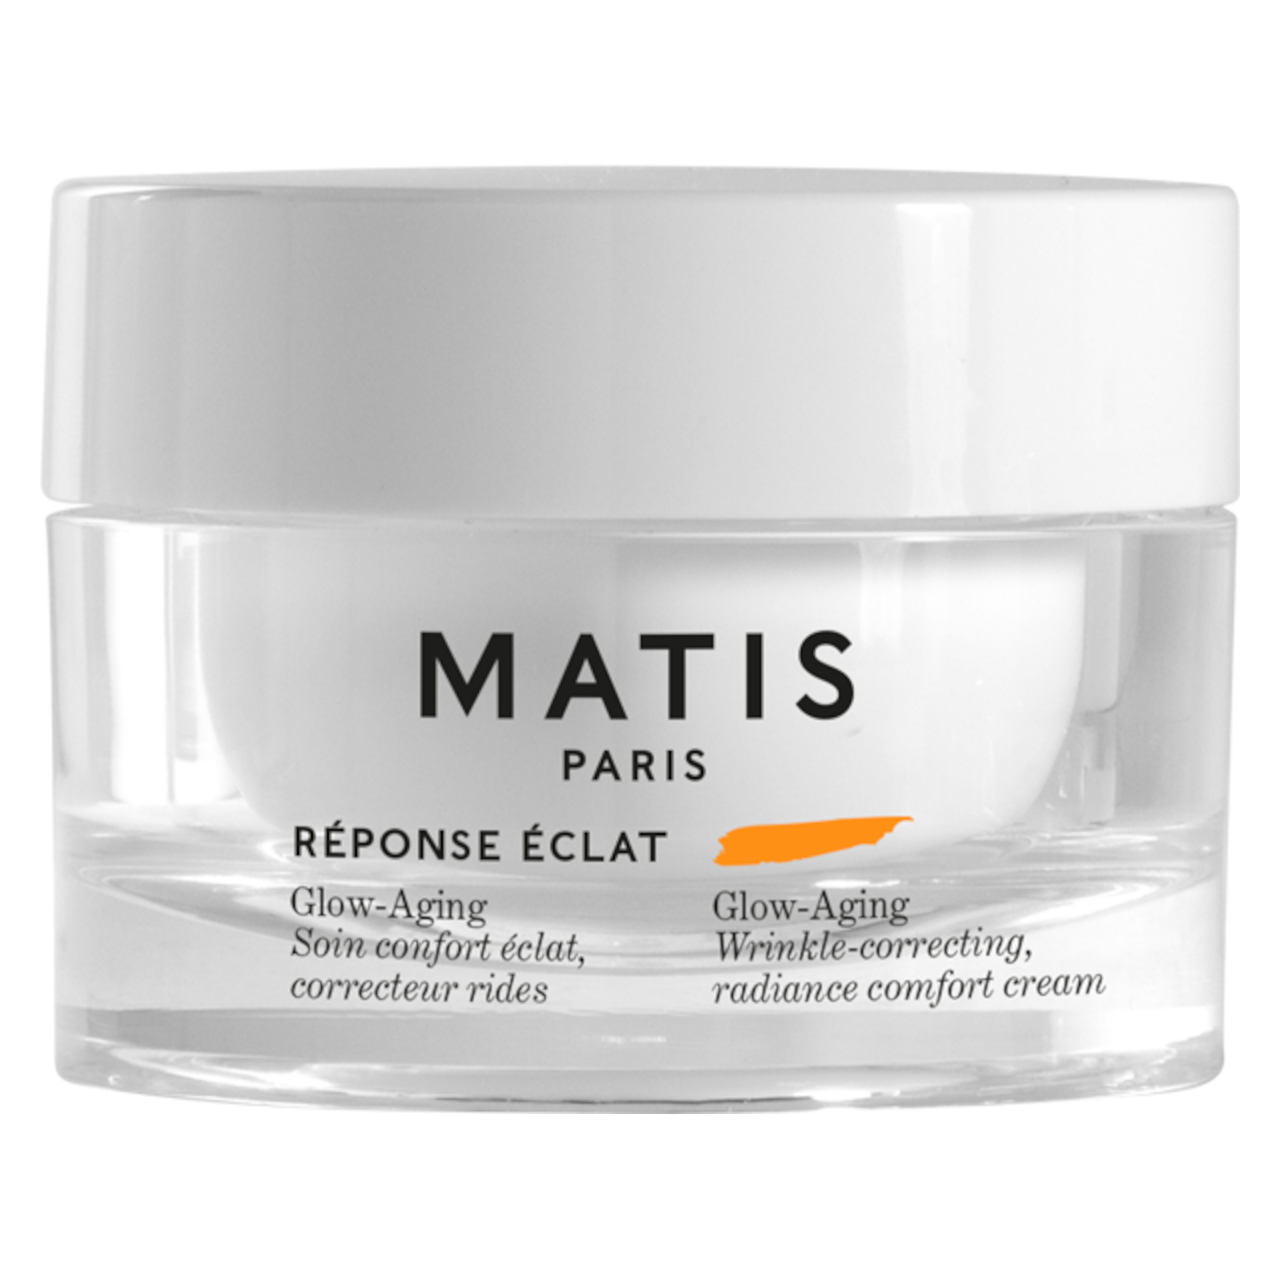 Is Matis preventative gel Eclat anti aging no longer available and if so what product has replaced it?